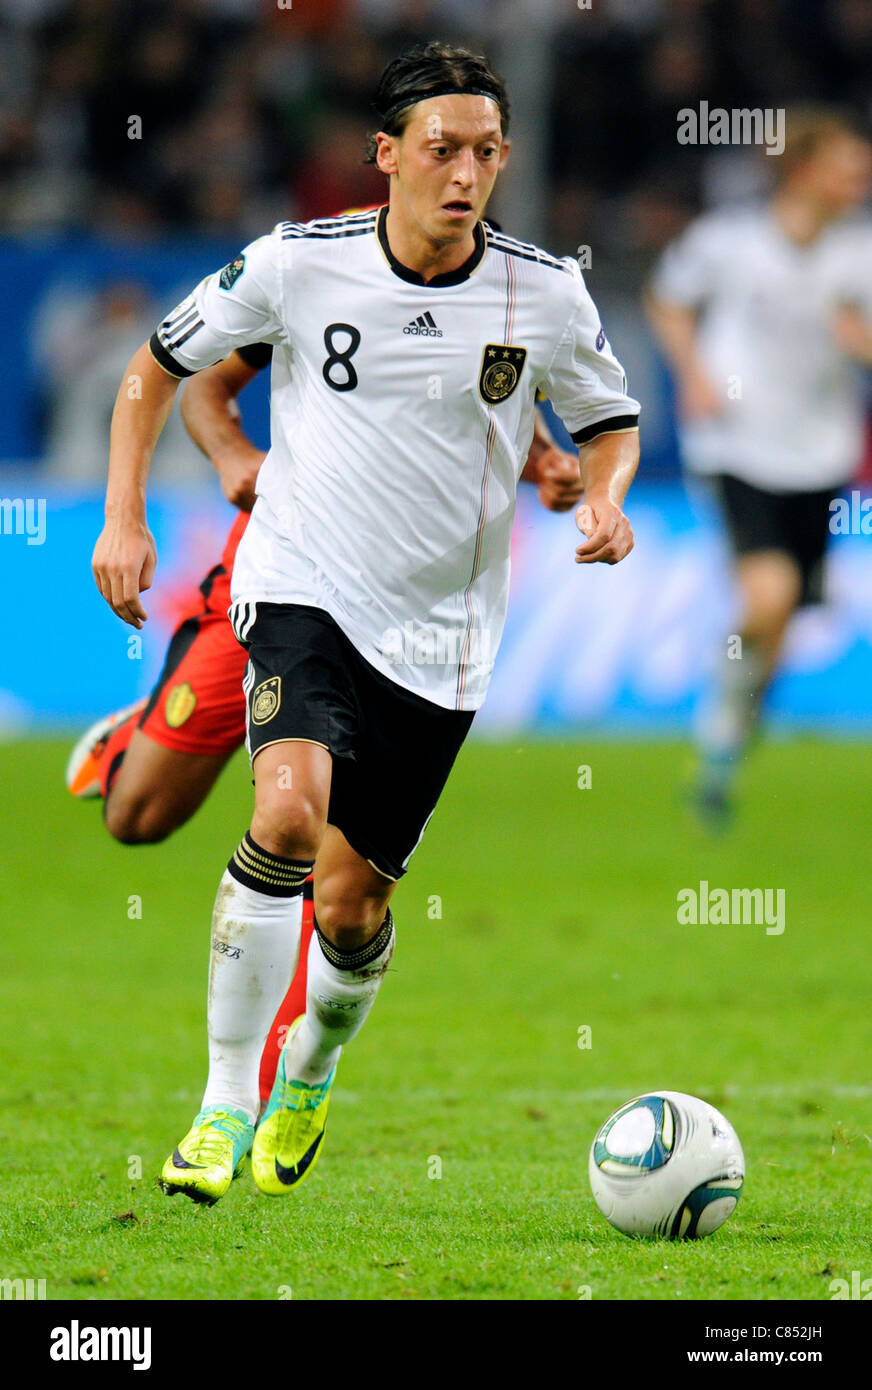 Qualification match for the European Football Championship in Poland and Ukraine 2012; Germany vs Belgium 3:1, at the Esprit Arena in Duesseldorf, Germany: Mesut Özil, Oezil (Germany, Real Madrid). Stock Photo